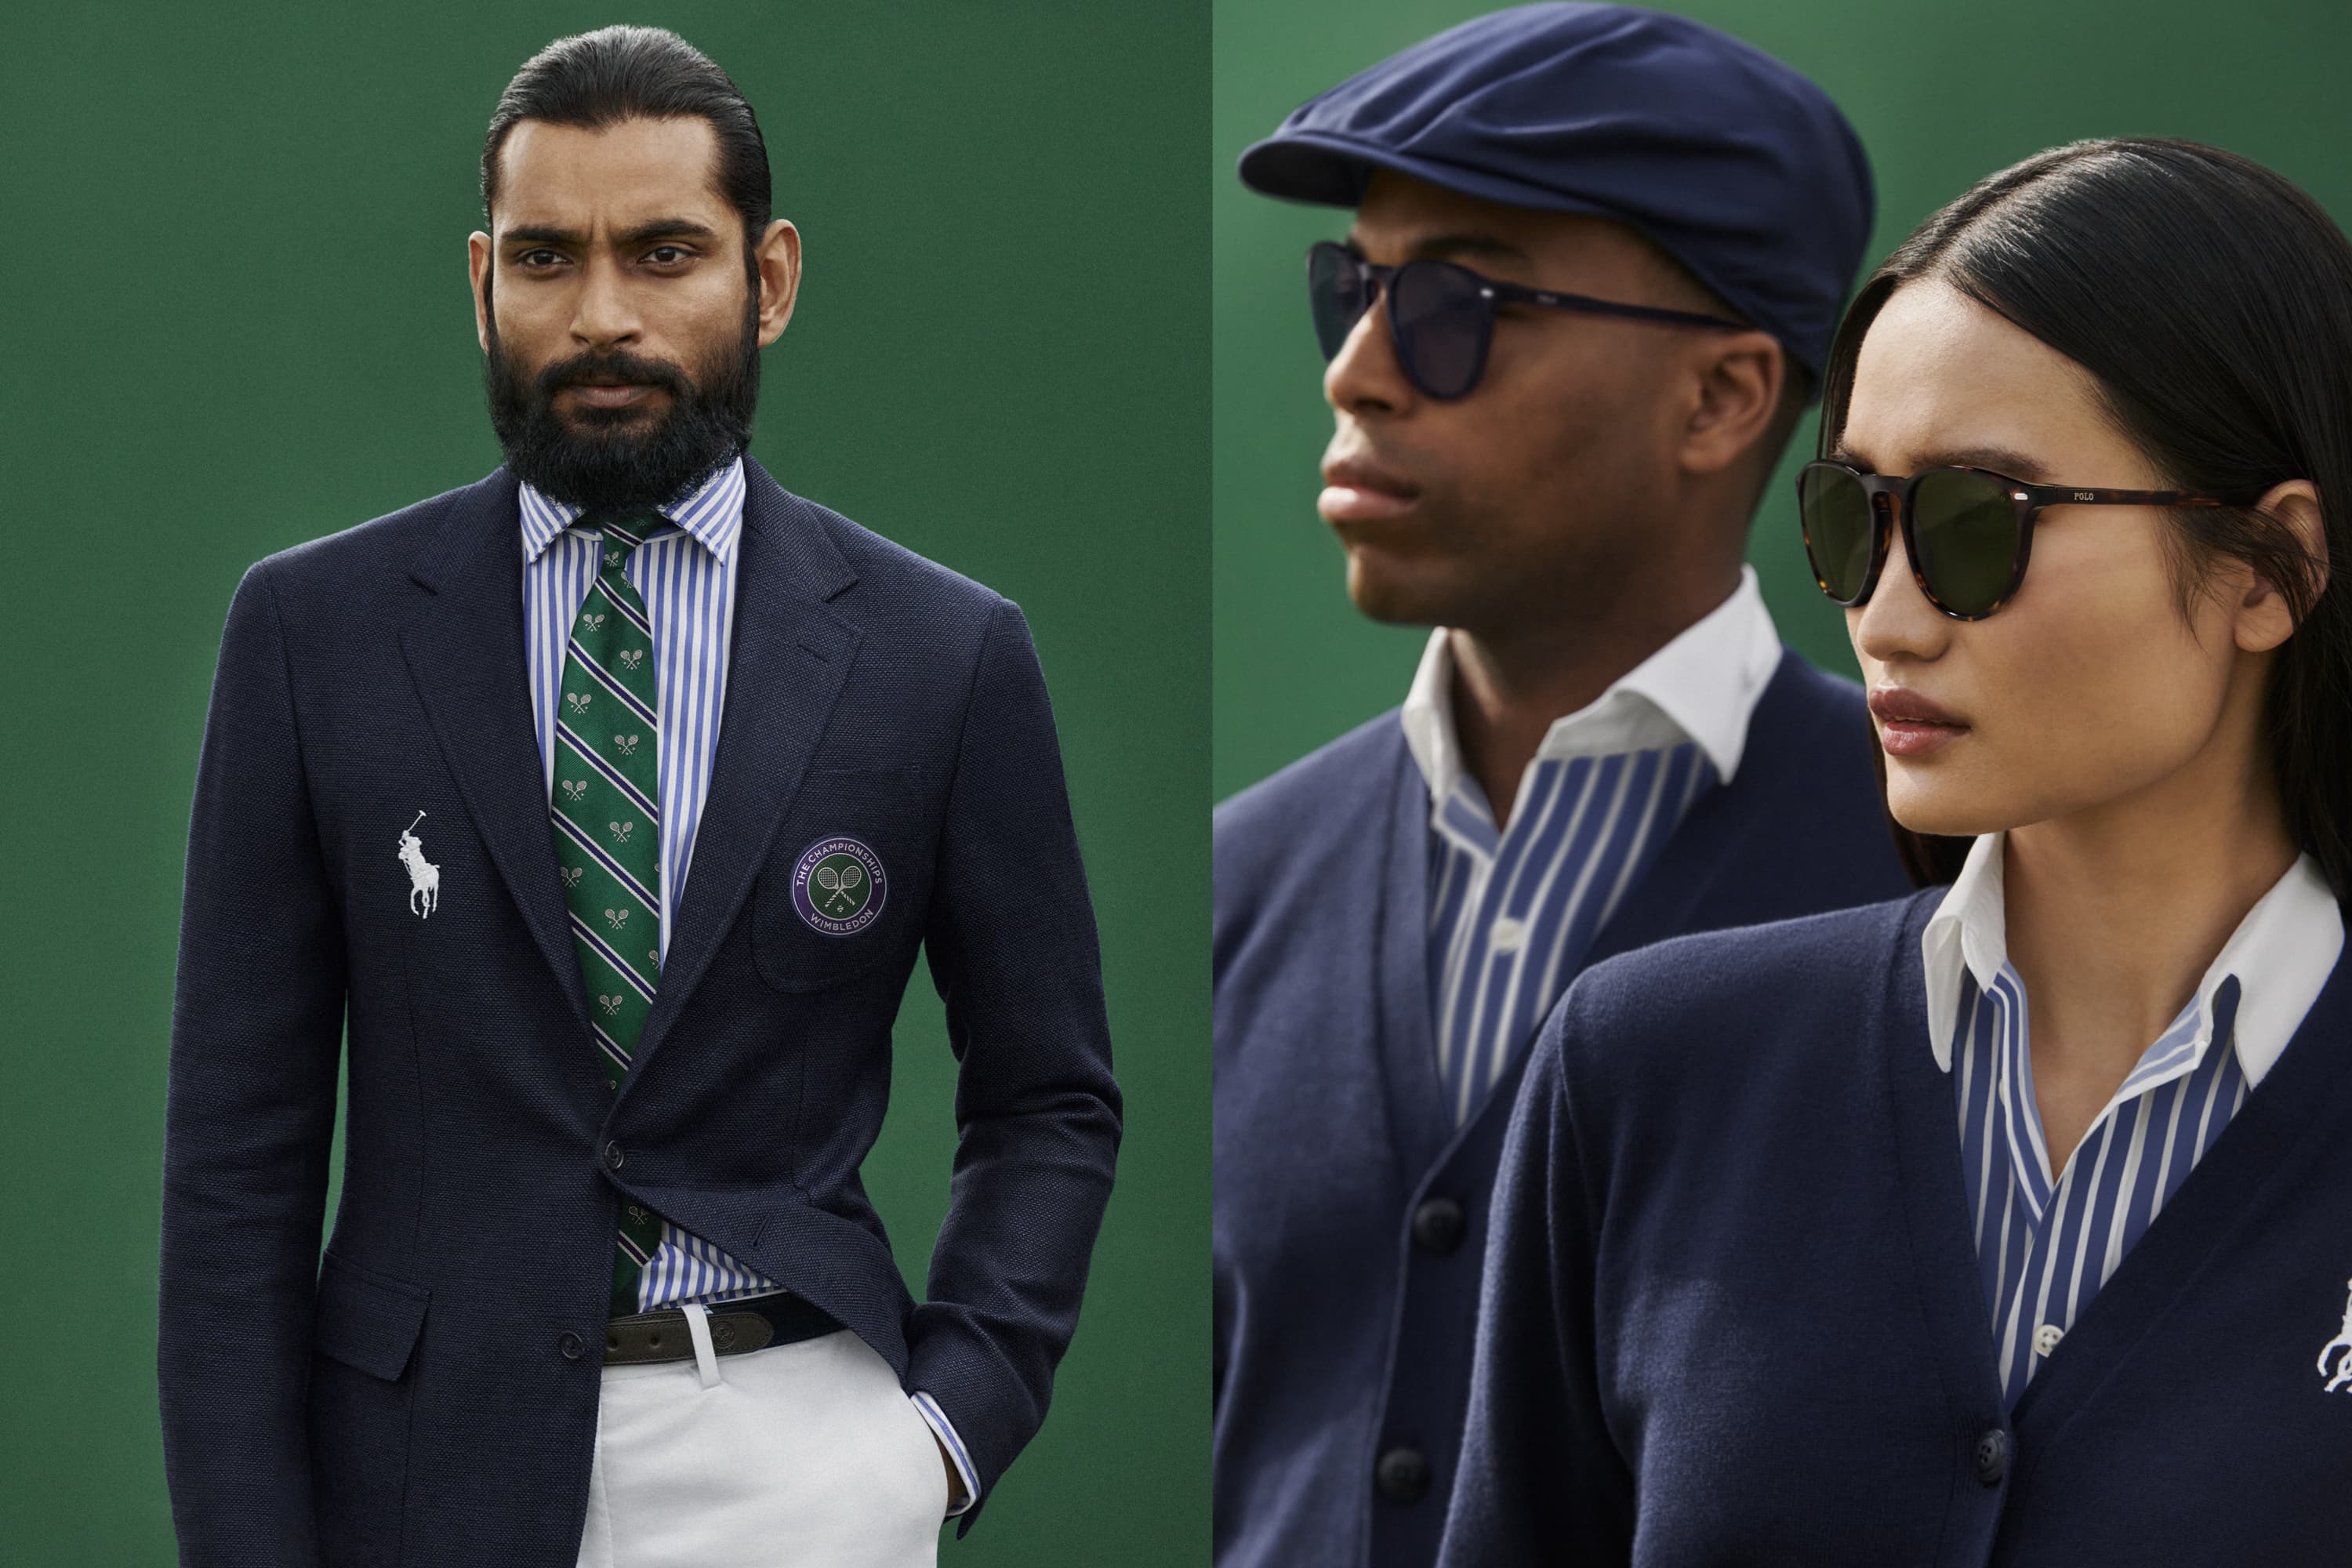 Ralph Lauren Celebrates The Championships, Wimbledon in partnership with  The All England Lawn Tennis Club